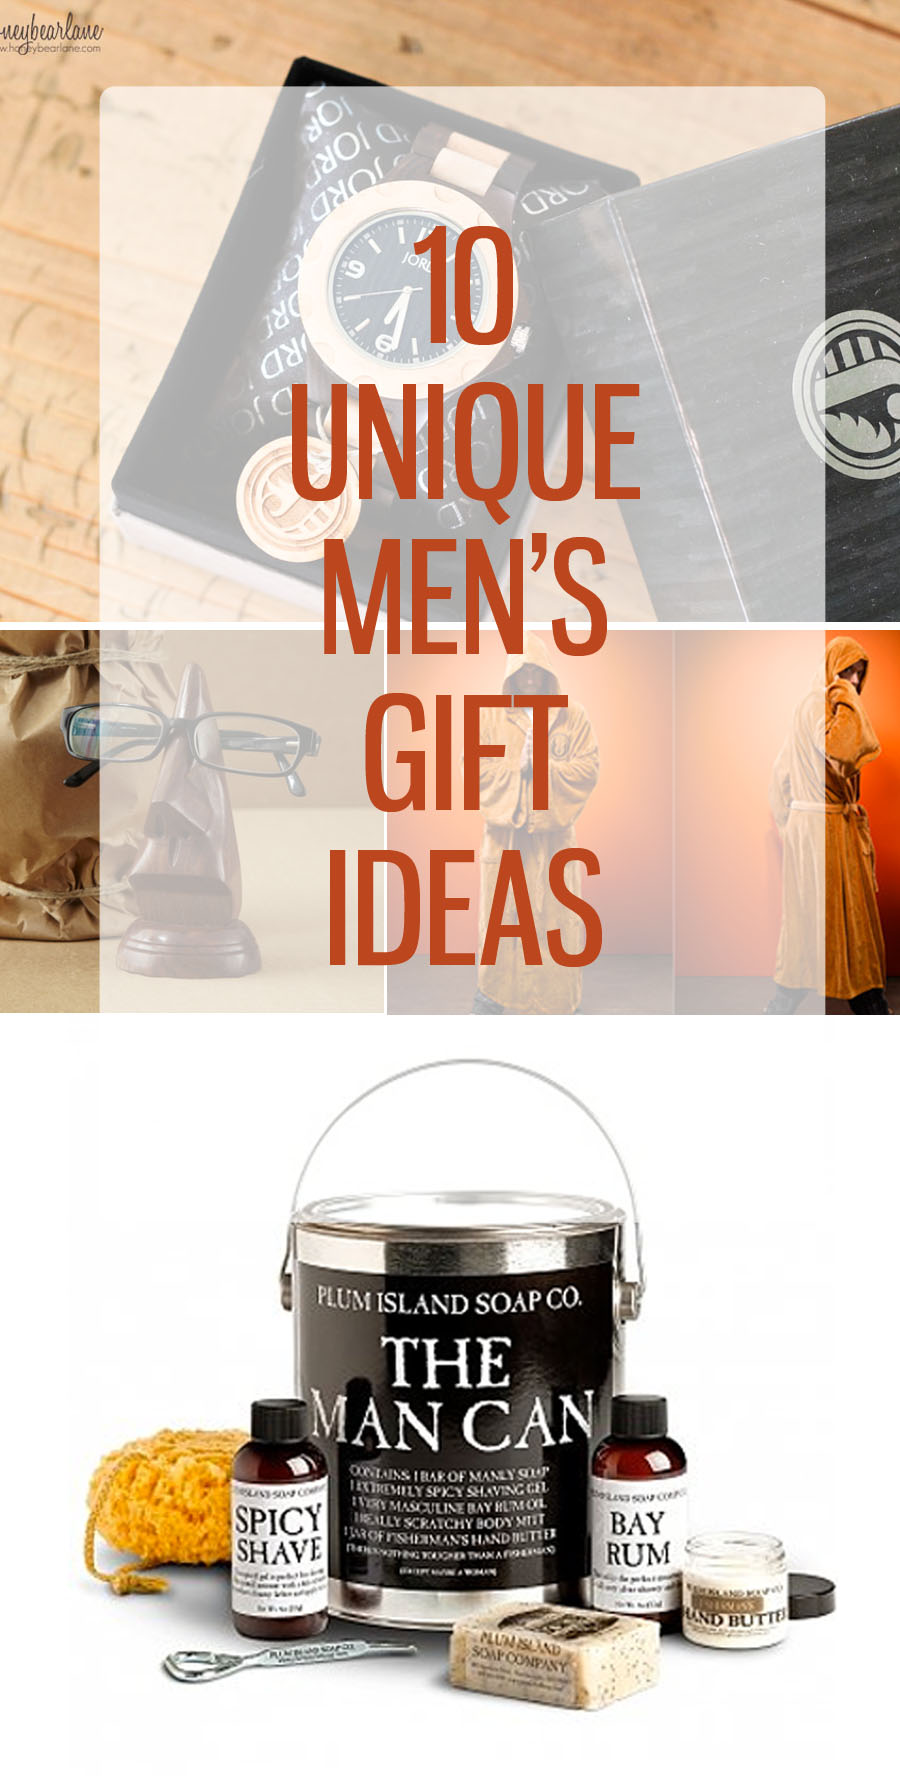 Unusual Gifts For Her - Gifts for Her | Unique Gift Ideas for Women ...